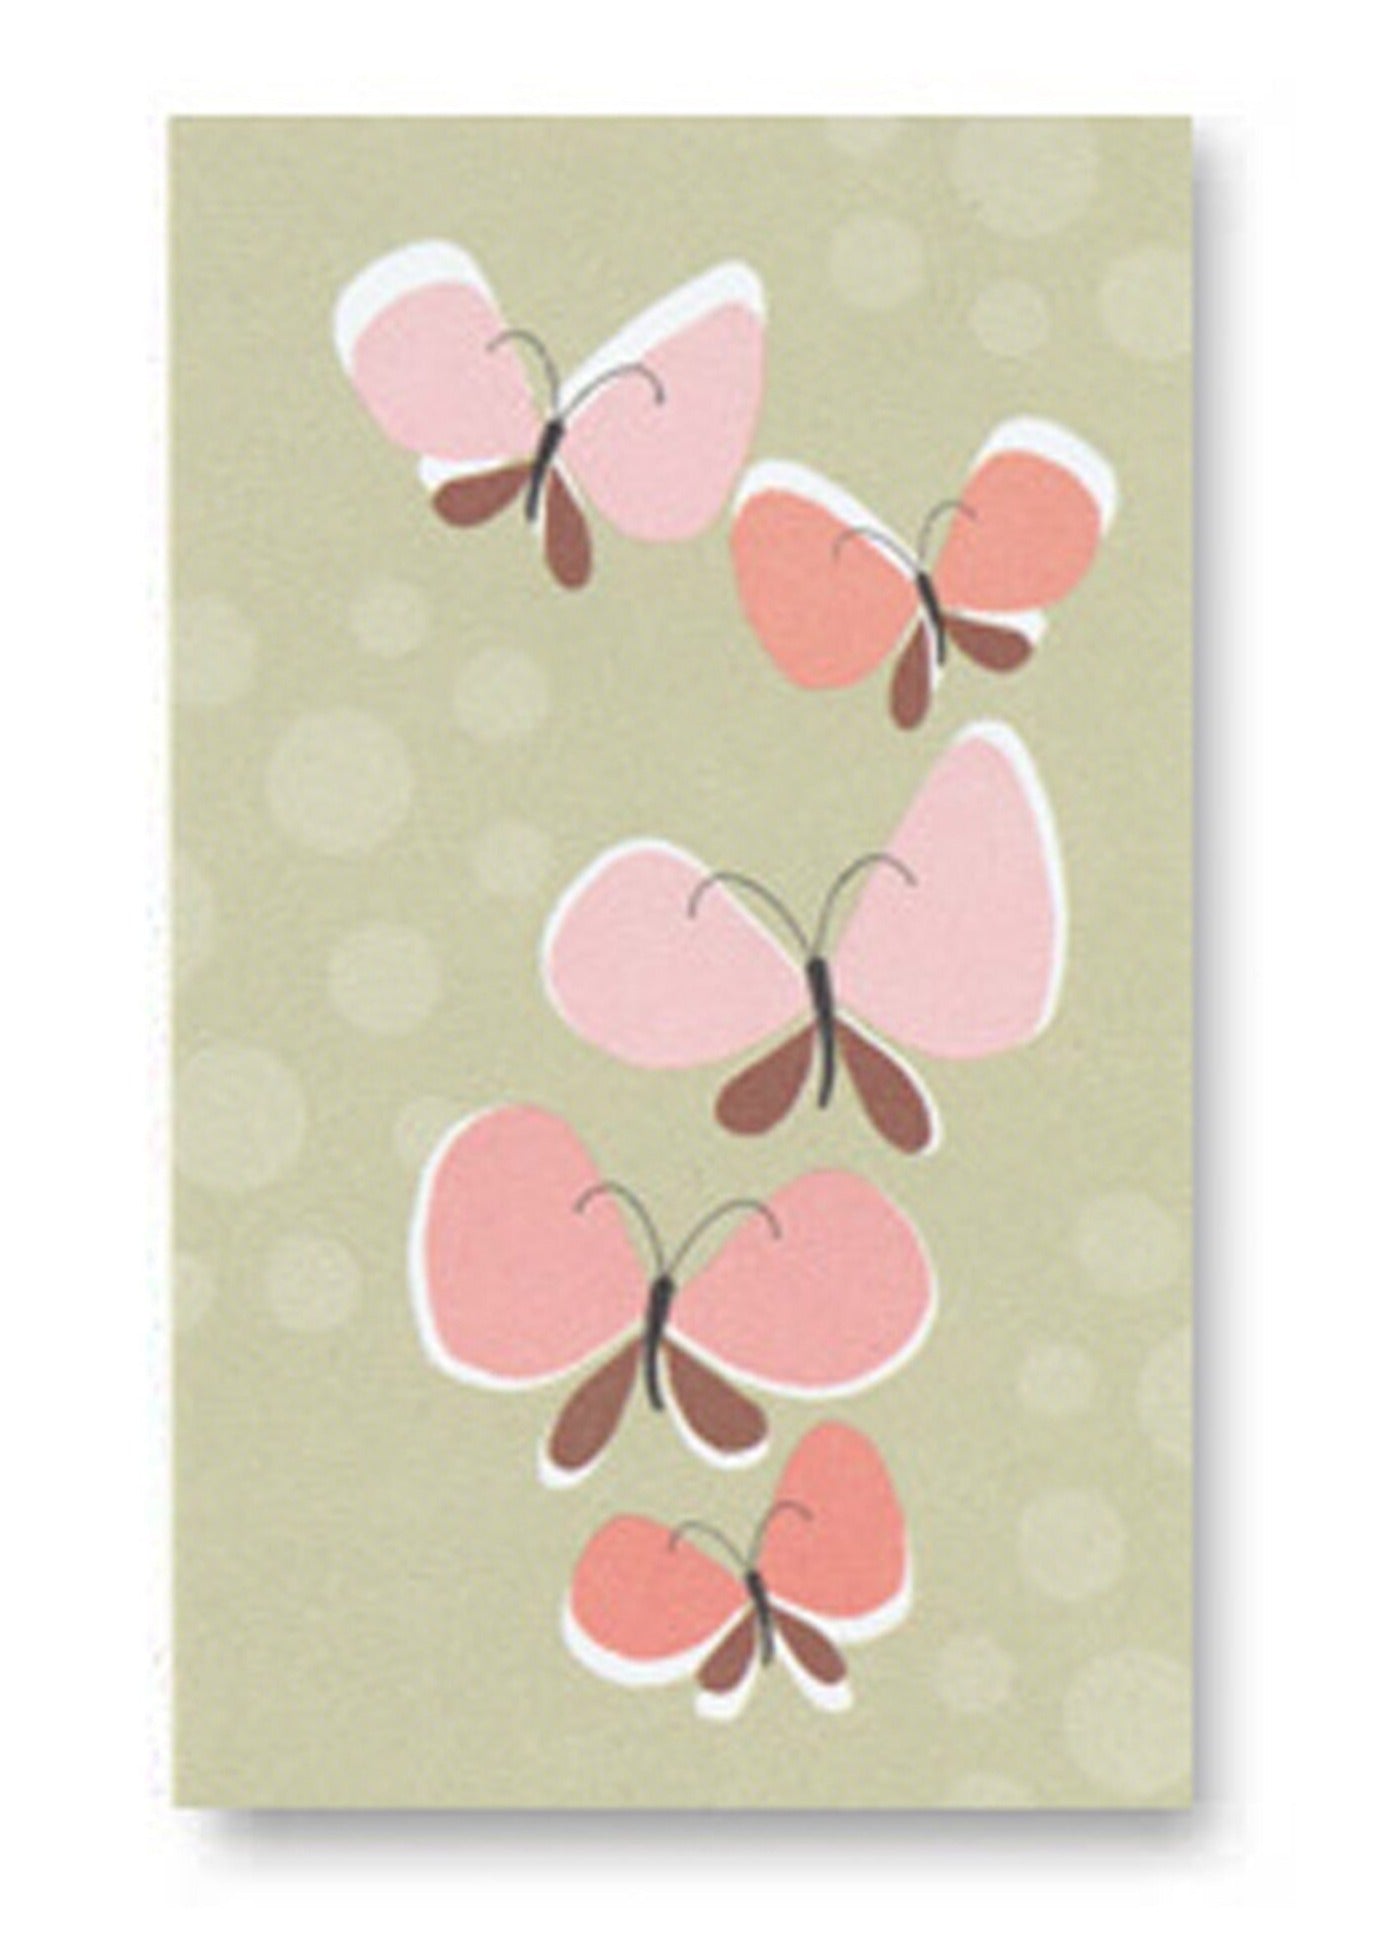 Mini Made Greeting Cards - FINAL SALE Home & Lifestyle Butterfly Flock Greeting Card